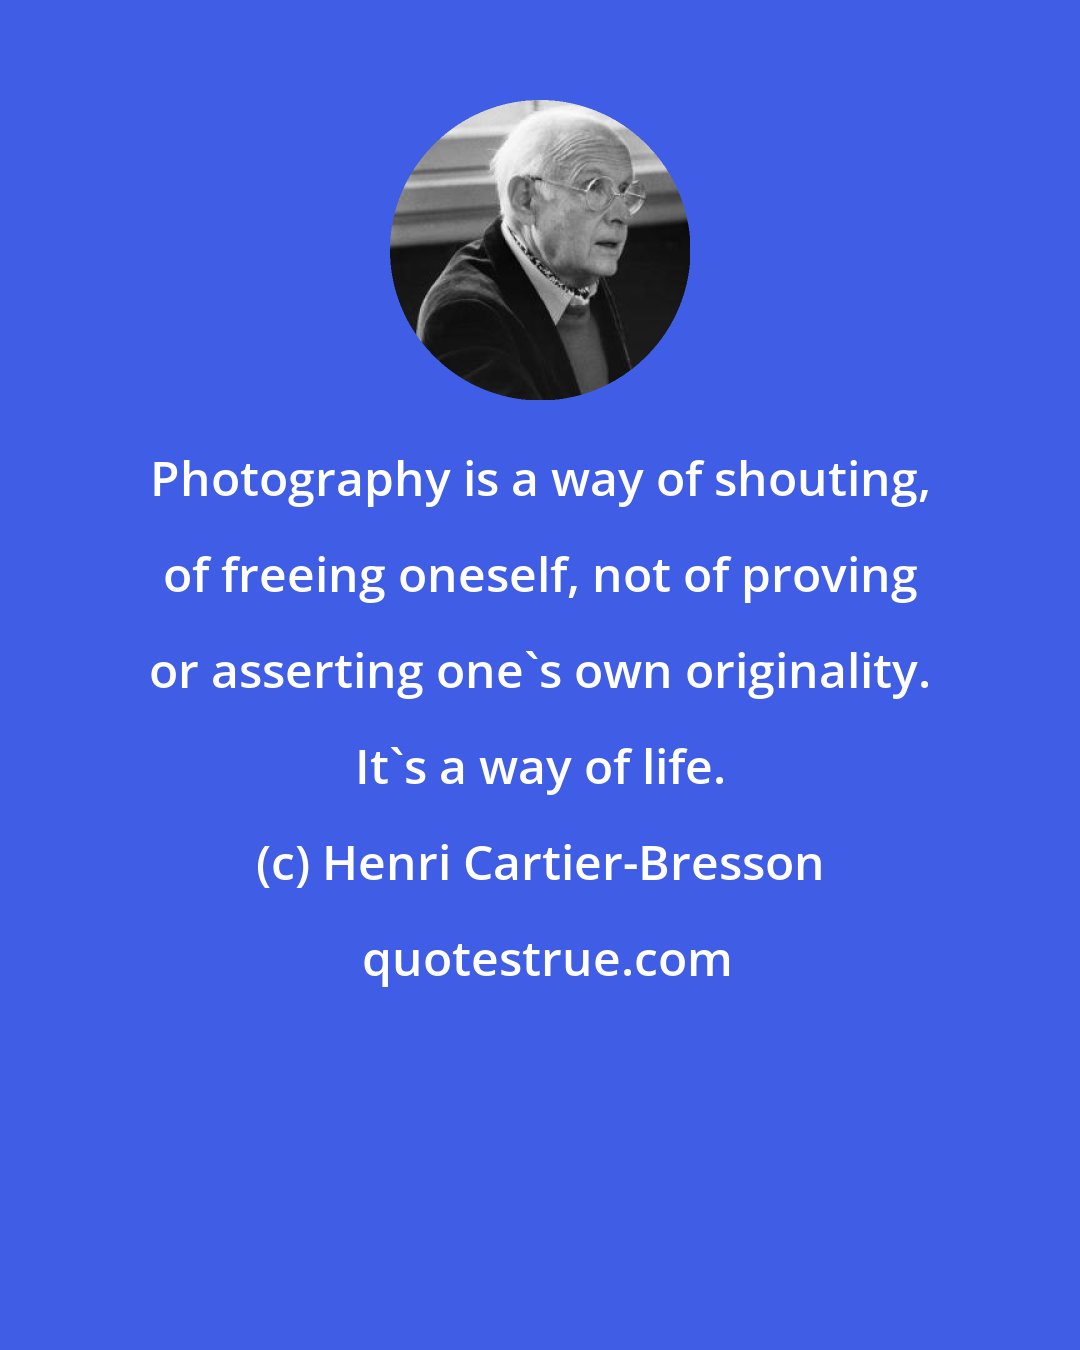 Henri Cartier-Bresson: Photography is a way of shouting, of freeing oneself, not of proving or asserting one's own originality. It's a way of life.